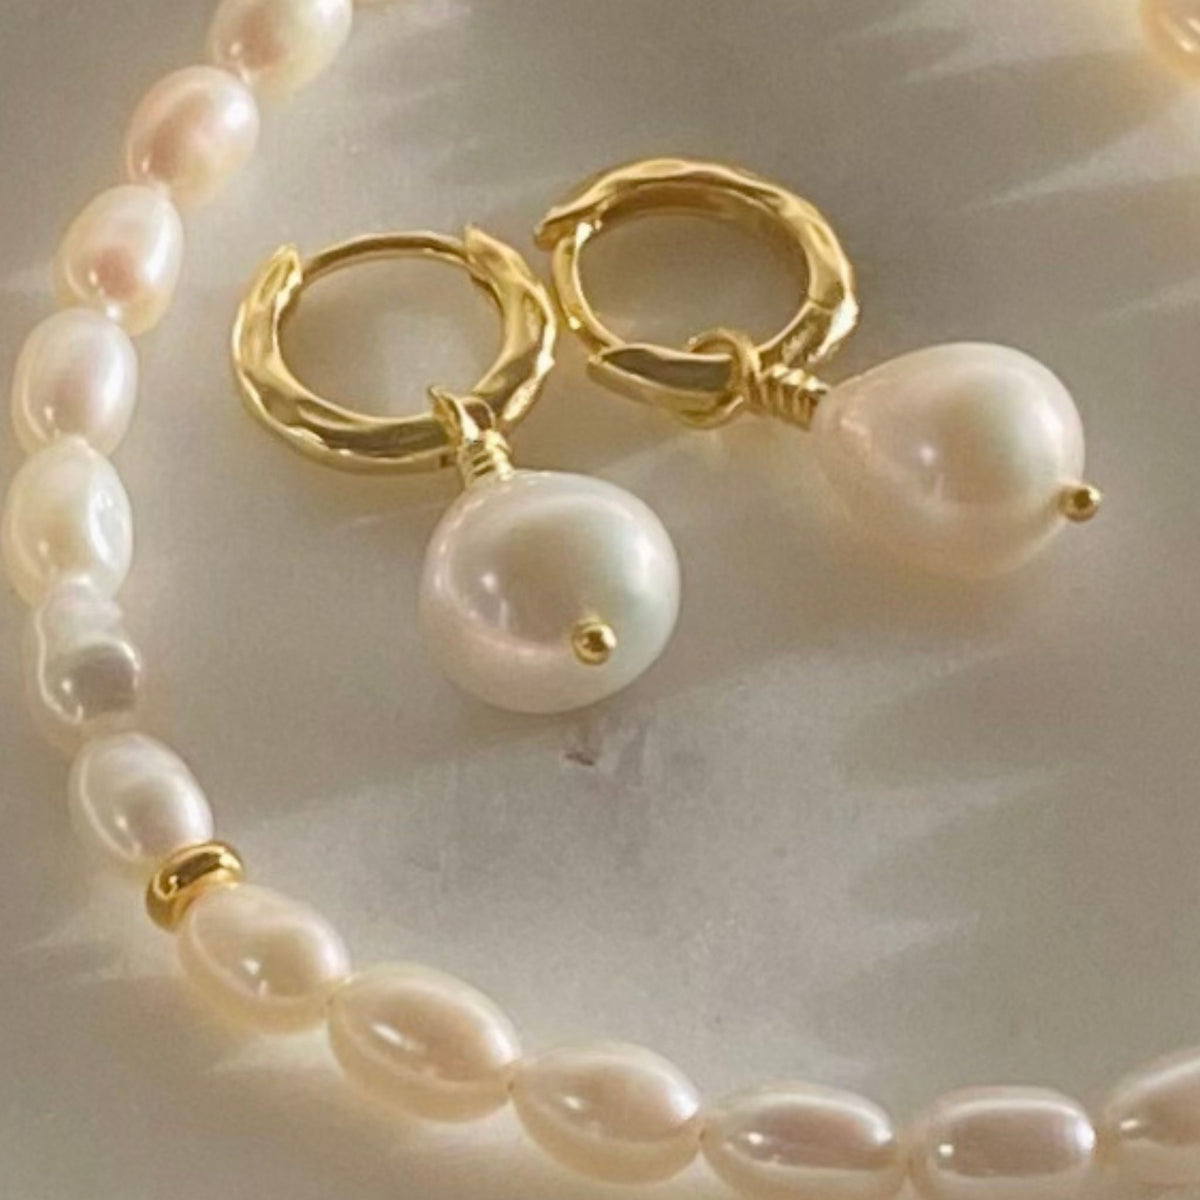 Gorgeous Freshwater Pearl Jewellery Gift Set with Earrings - Make a Wish